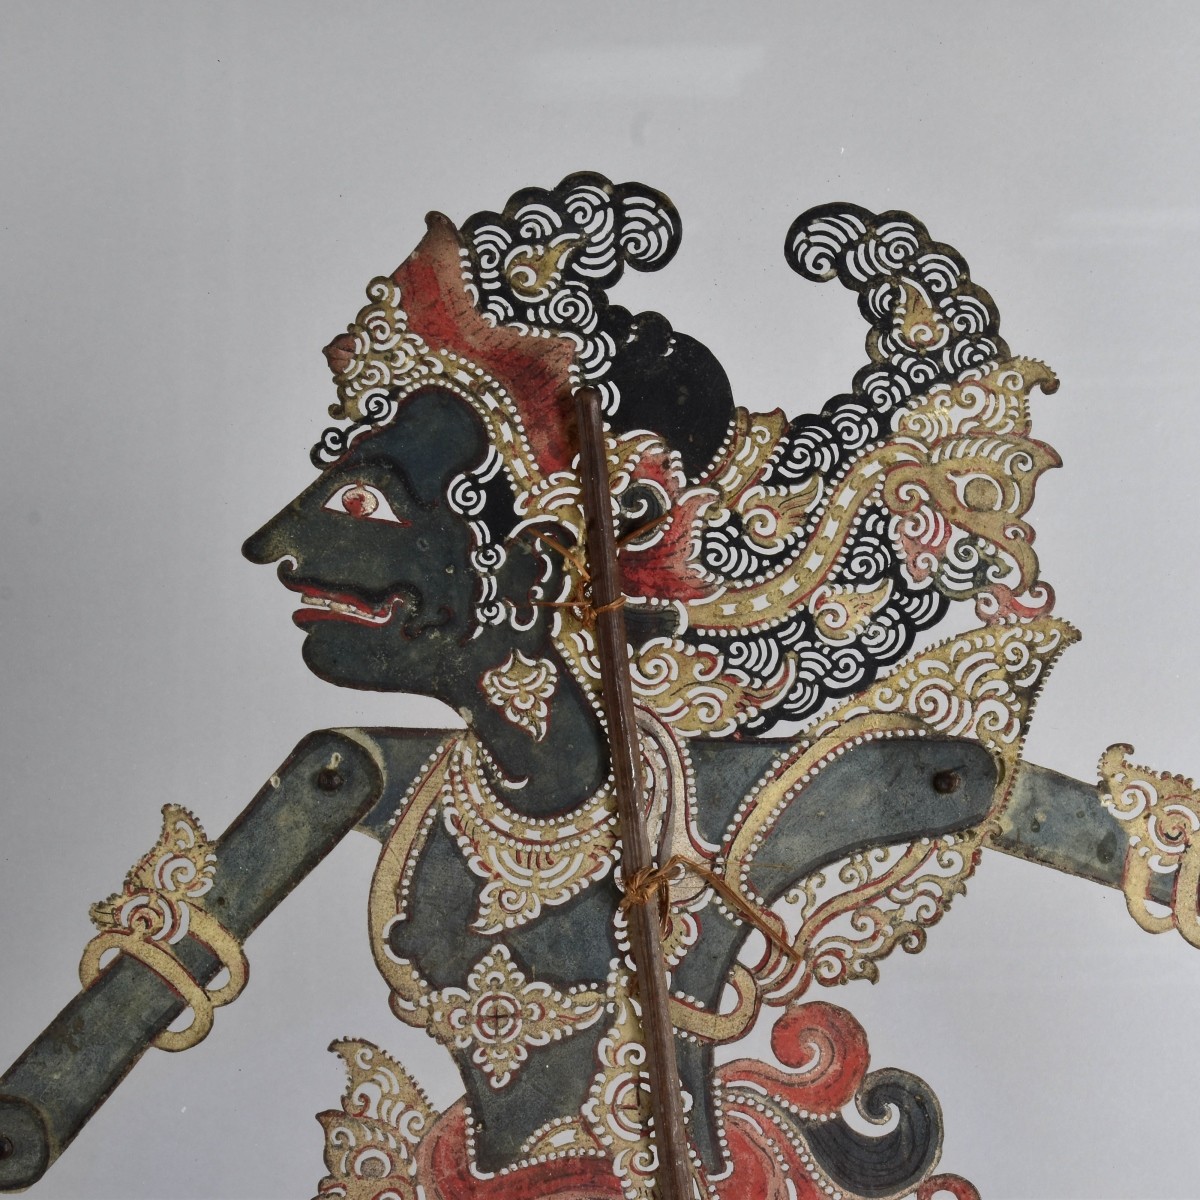 Pair of Antique Thai Puppets in Display Cases